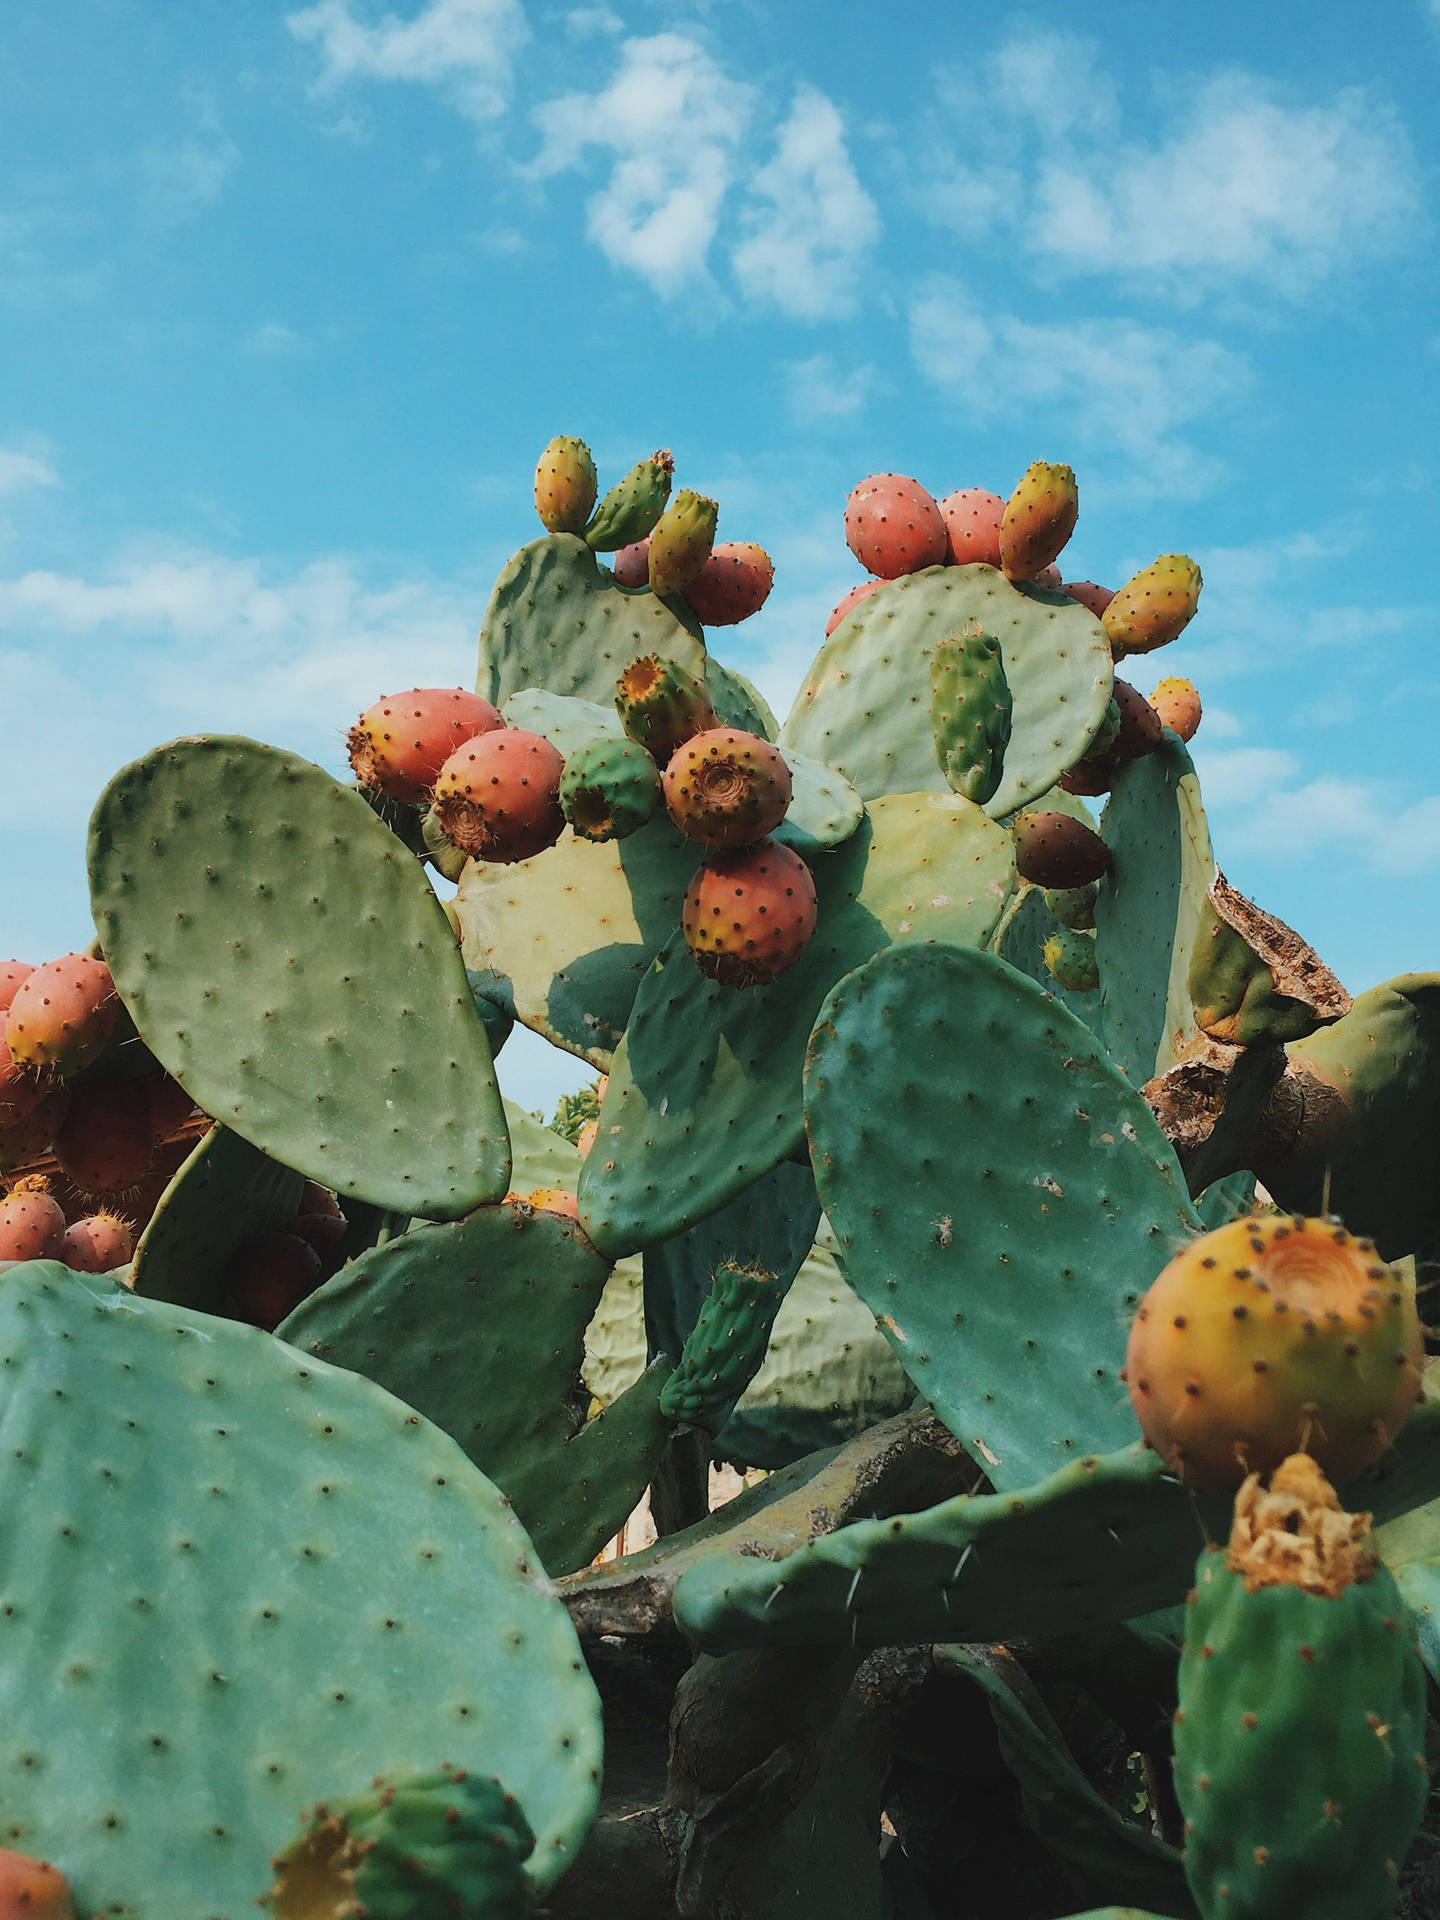 Free Prickly Pear Wallpaper Downloads, [100+] Prickly Pear Wallpapers for  FREE 